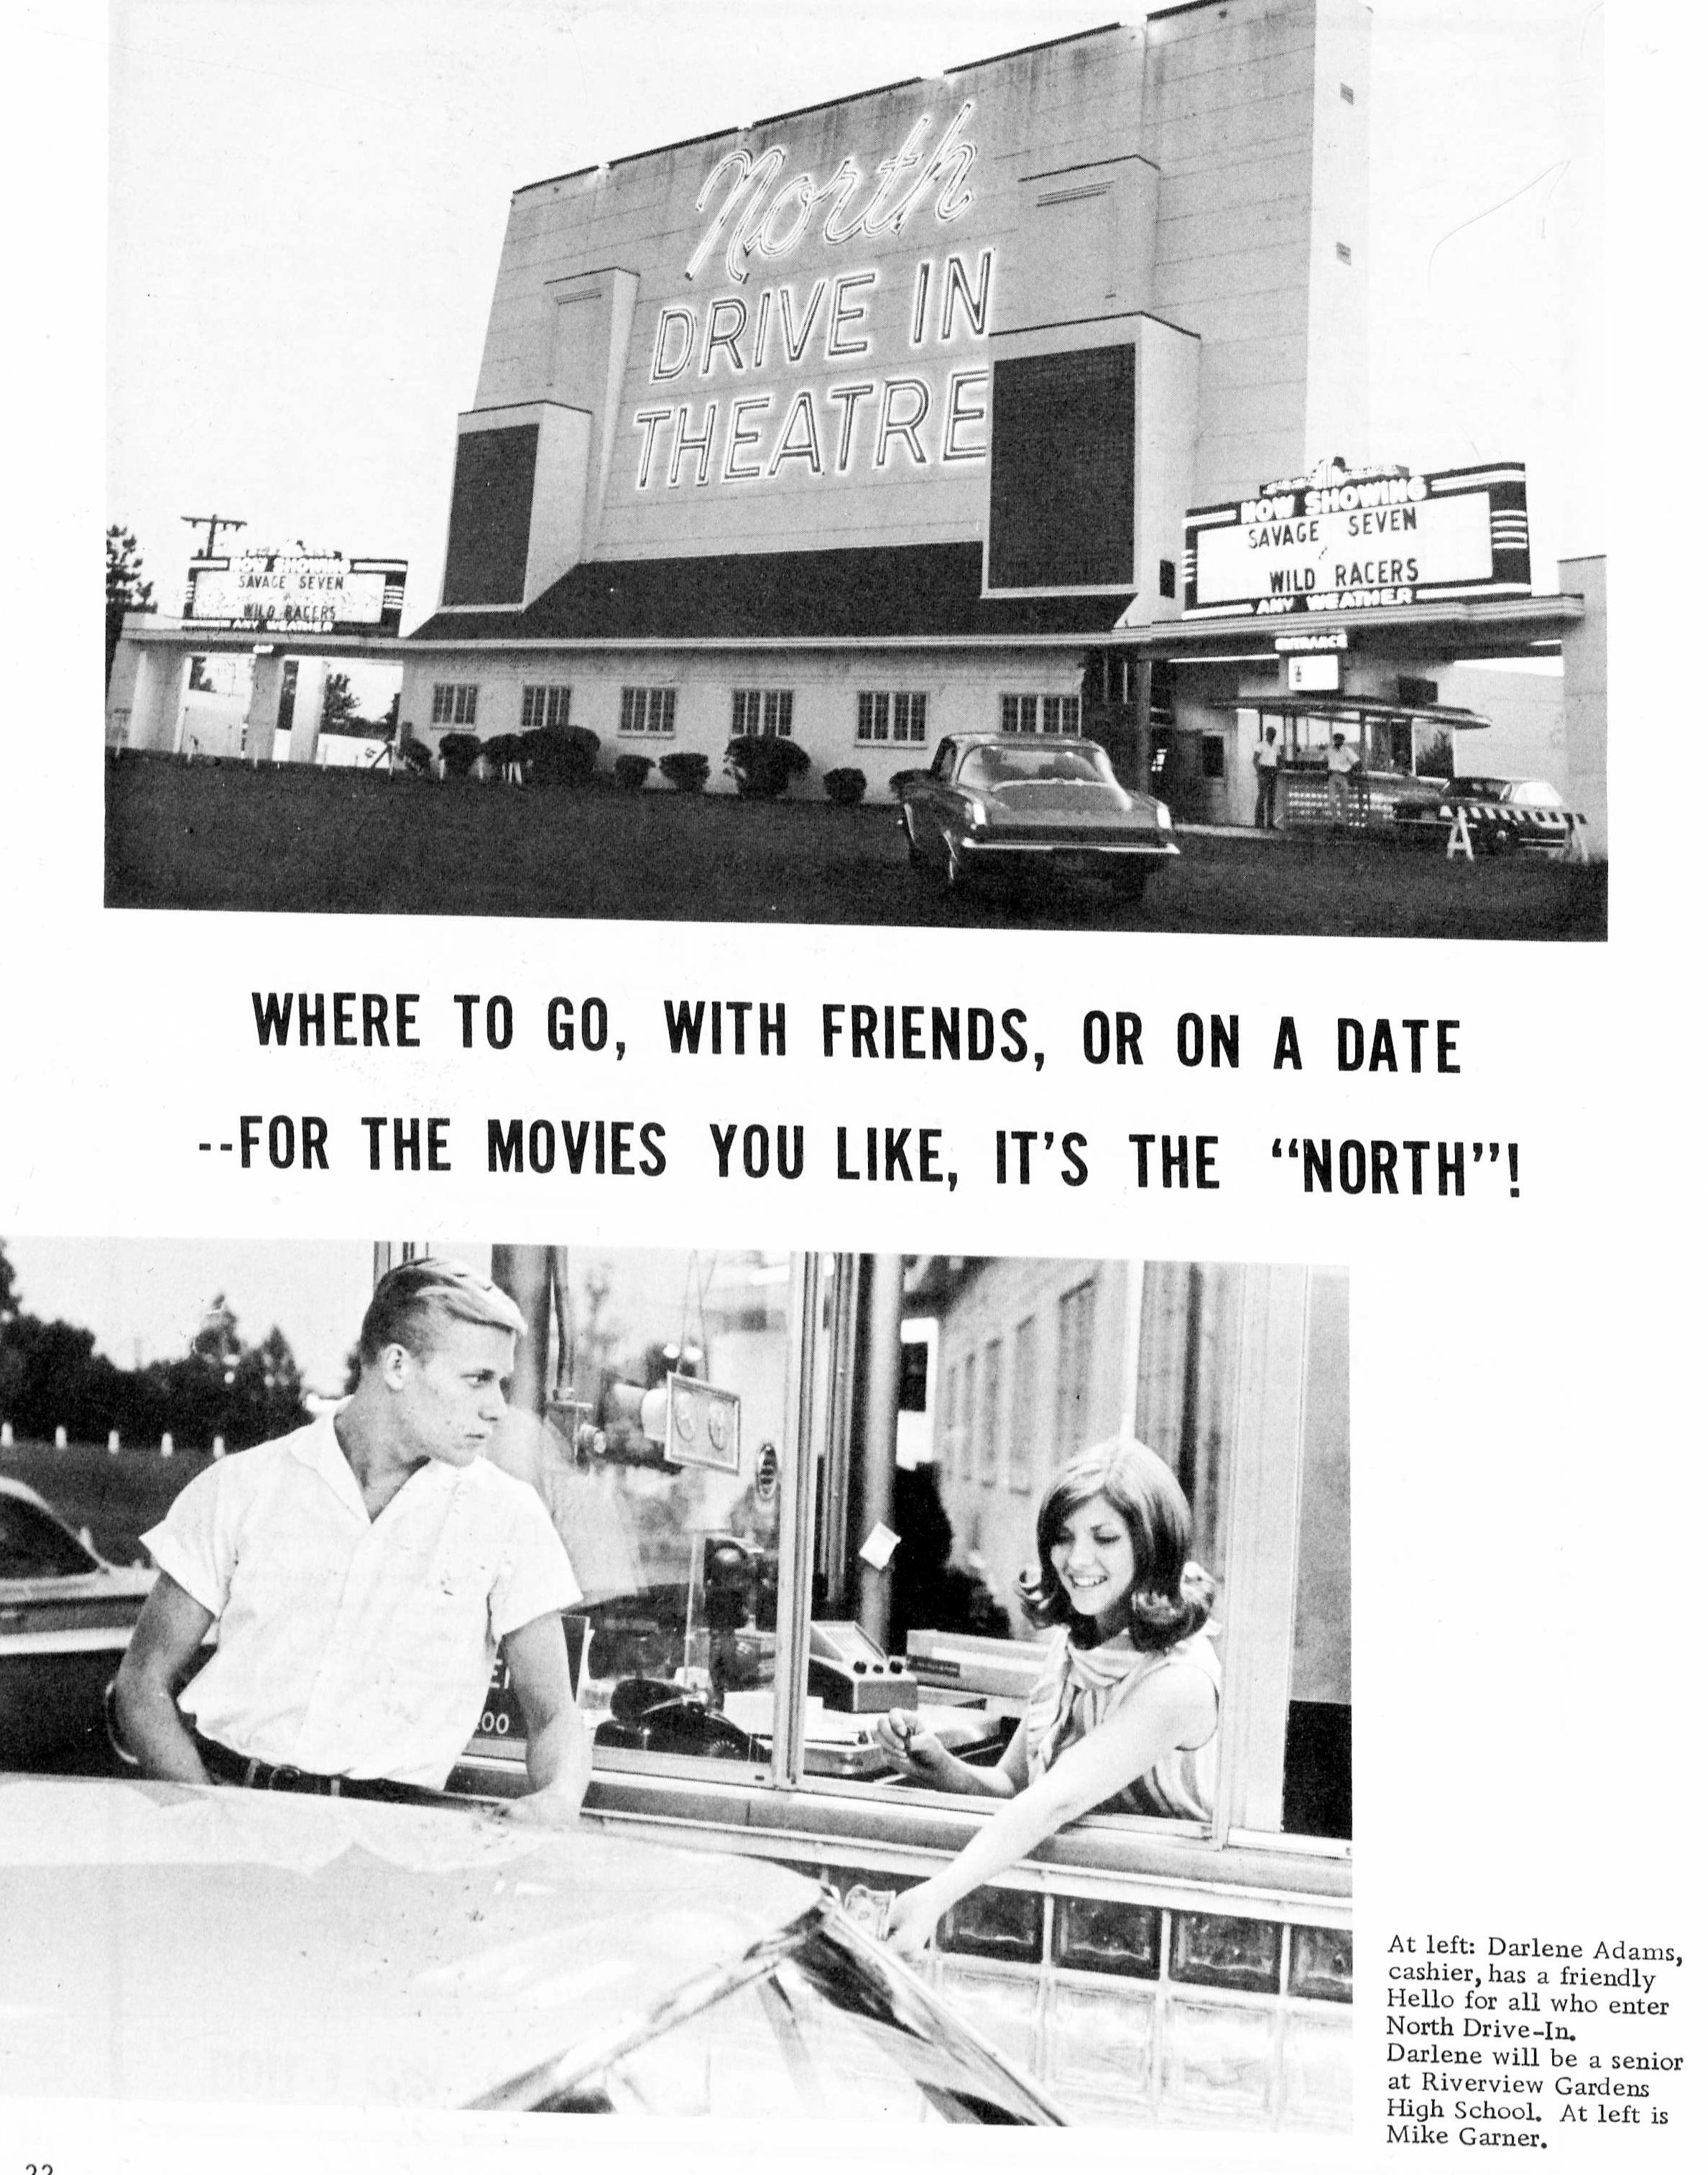 NORTH DRIVE IN THEATRE ad featured in PROM MAGAZINE JUNE 1968. The cashier featured in the bottom photo is Darlene Adams (RGHS Class of 1969).